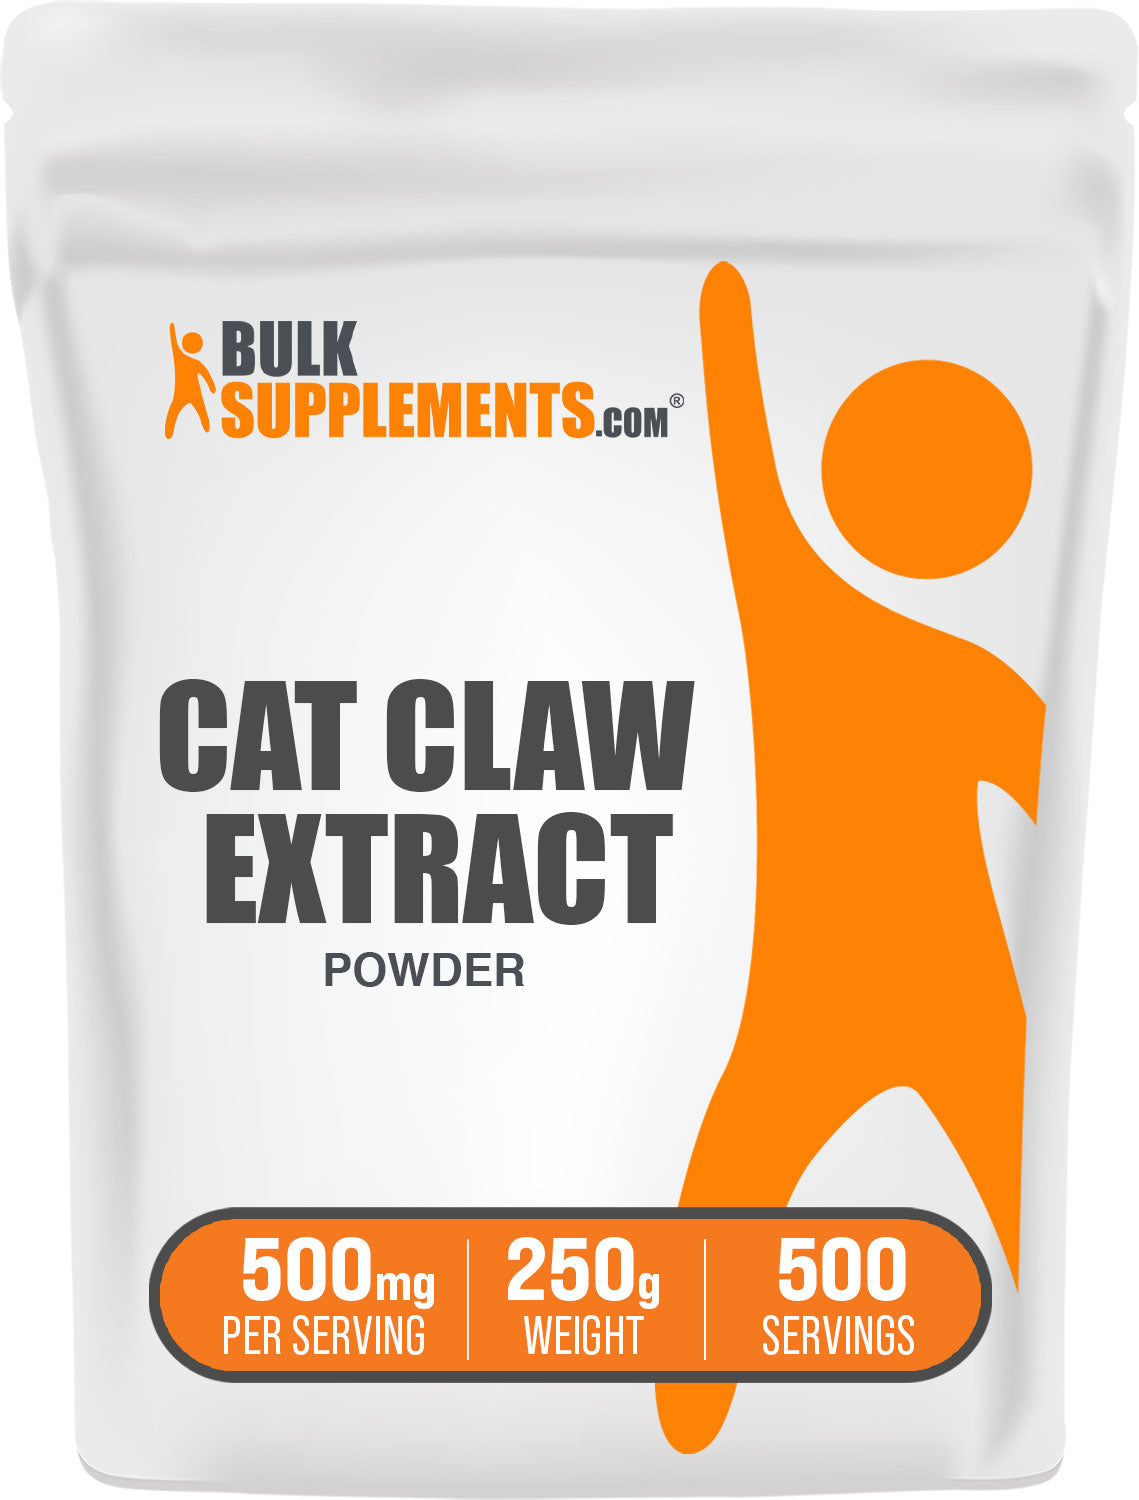 250g cats claw